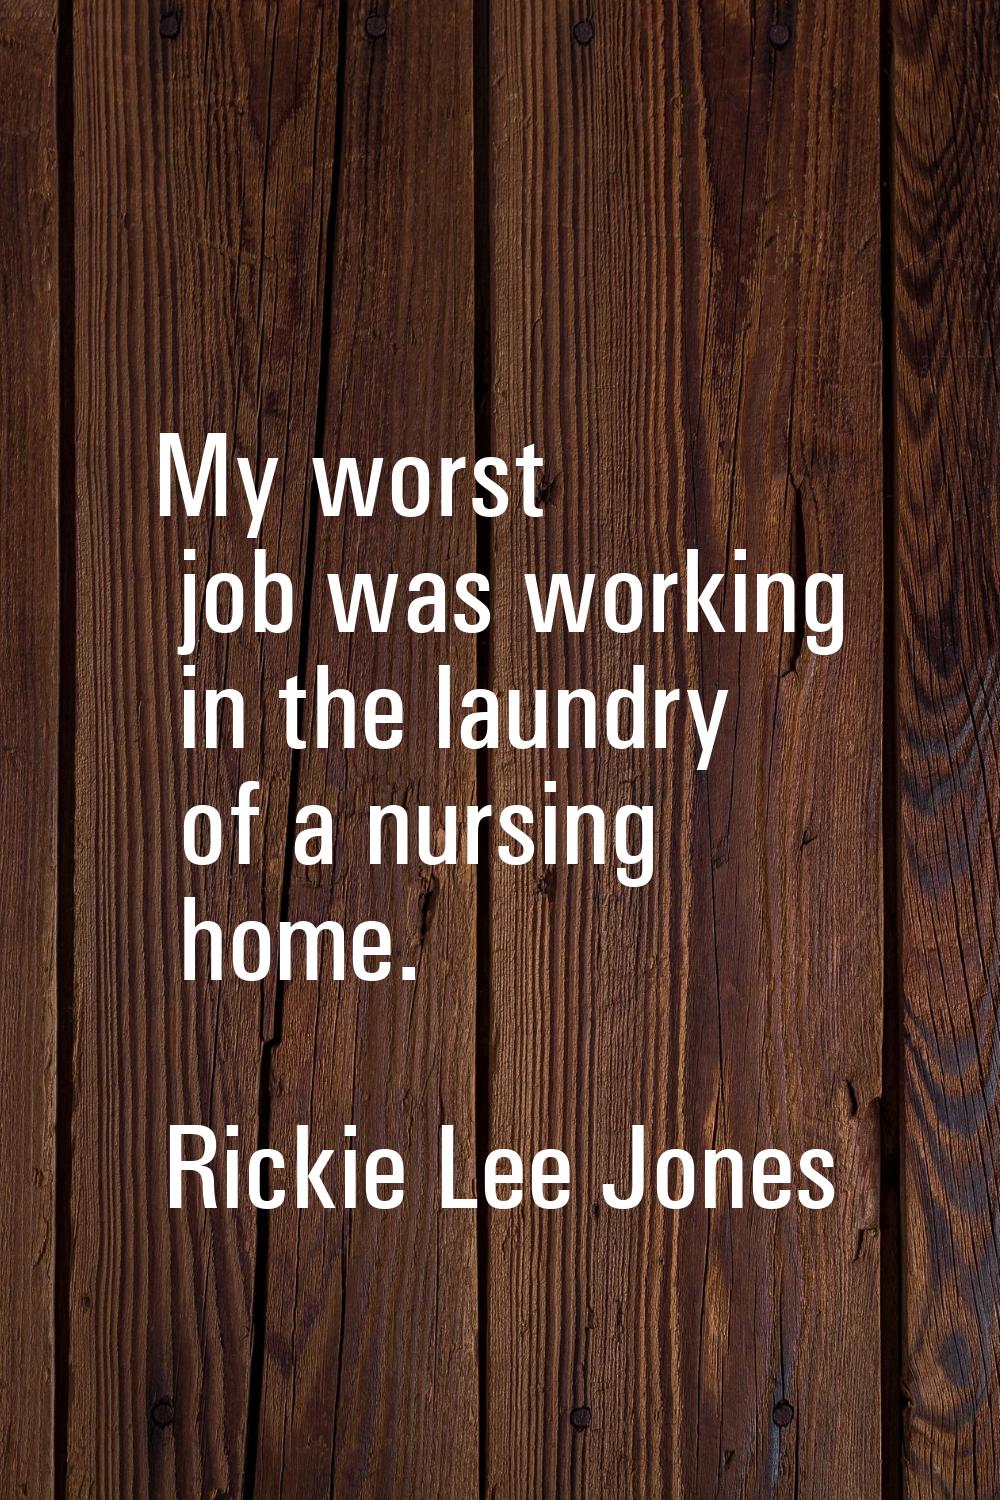 My worst job was working in the laundry of a nursing home.